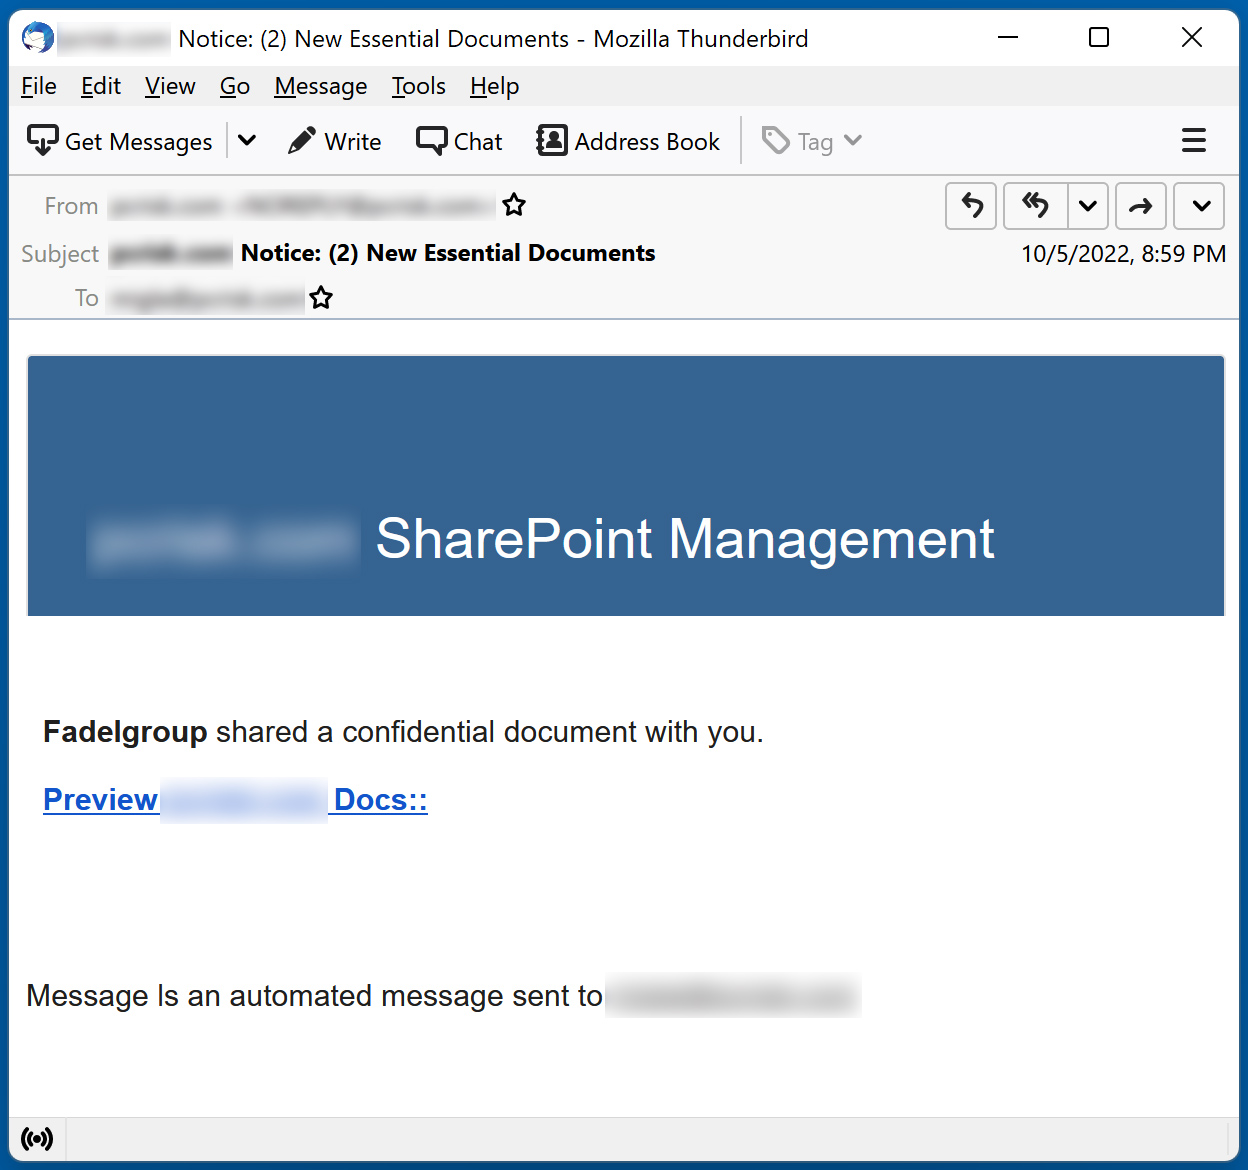 SharePoint-themed spam email (2022-10-06)